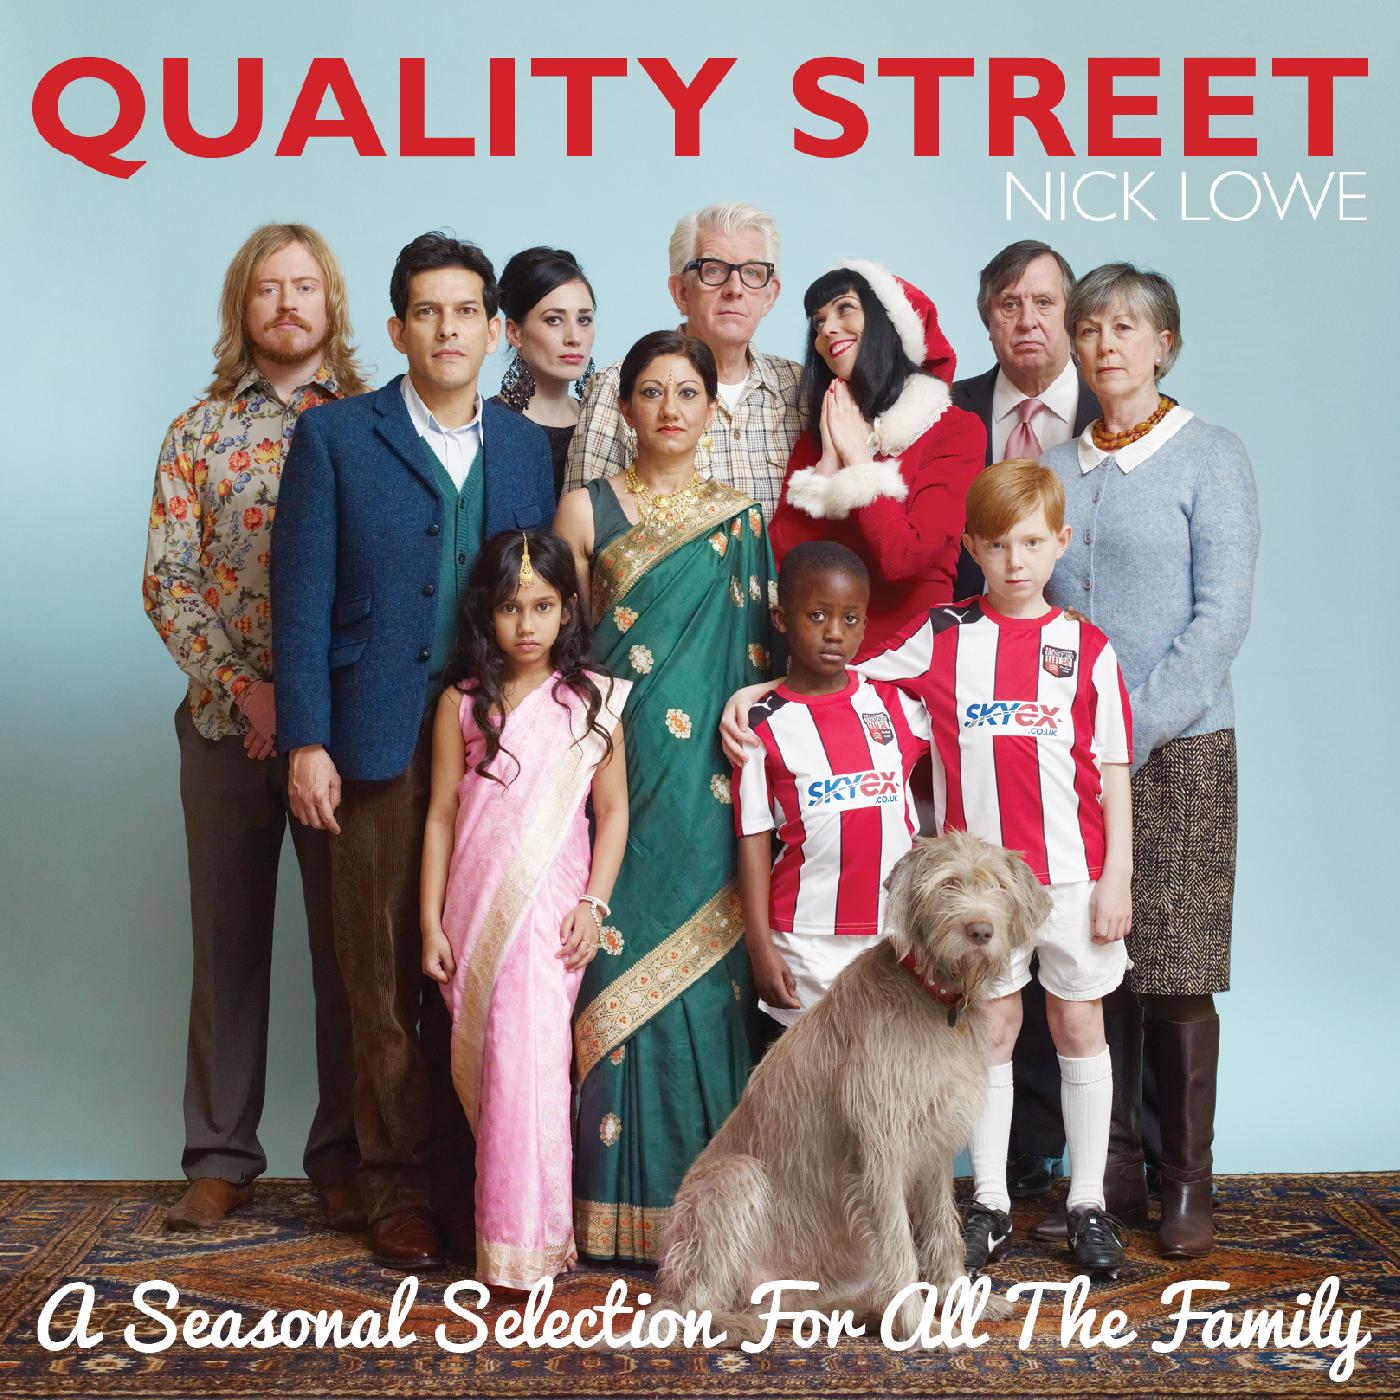 Nick Lowe | Quality Street: A Seasonal Selection for All the Family (10th Anniversary) (DELUXE EDITION, RED VINYL) | Vinyl